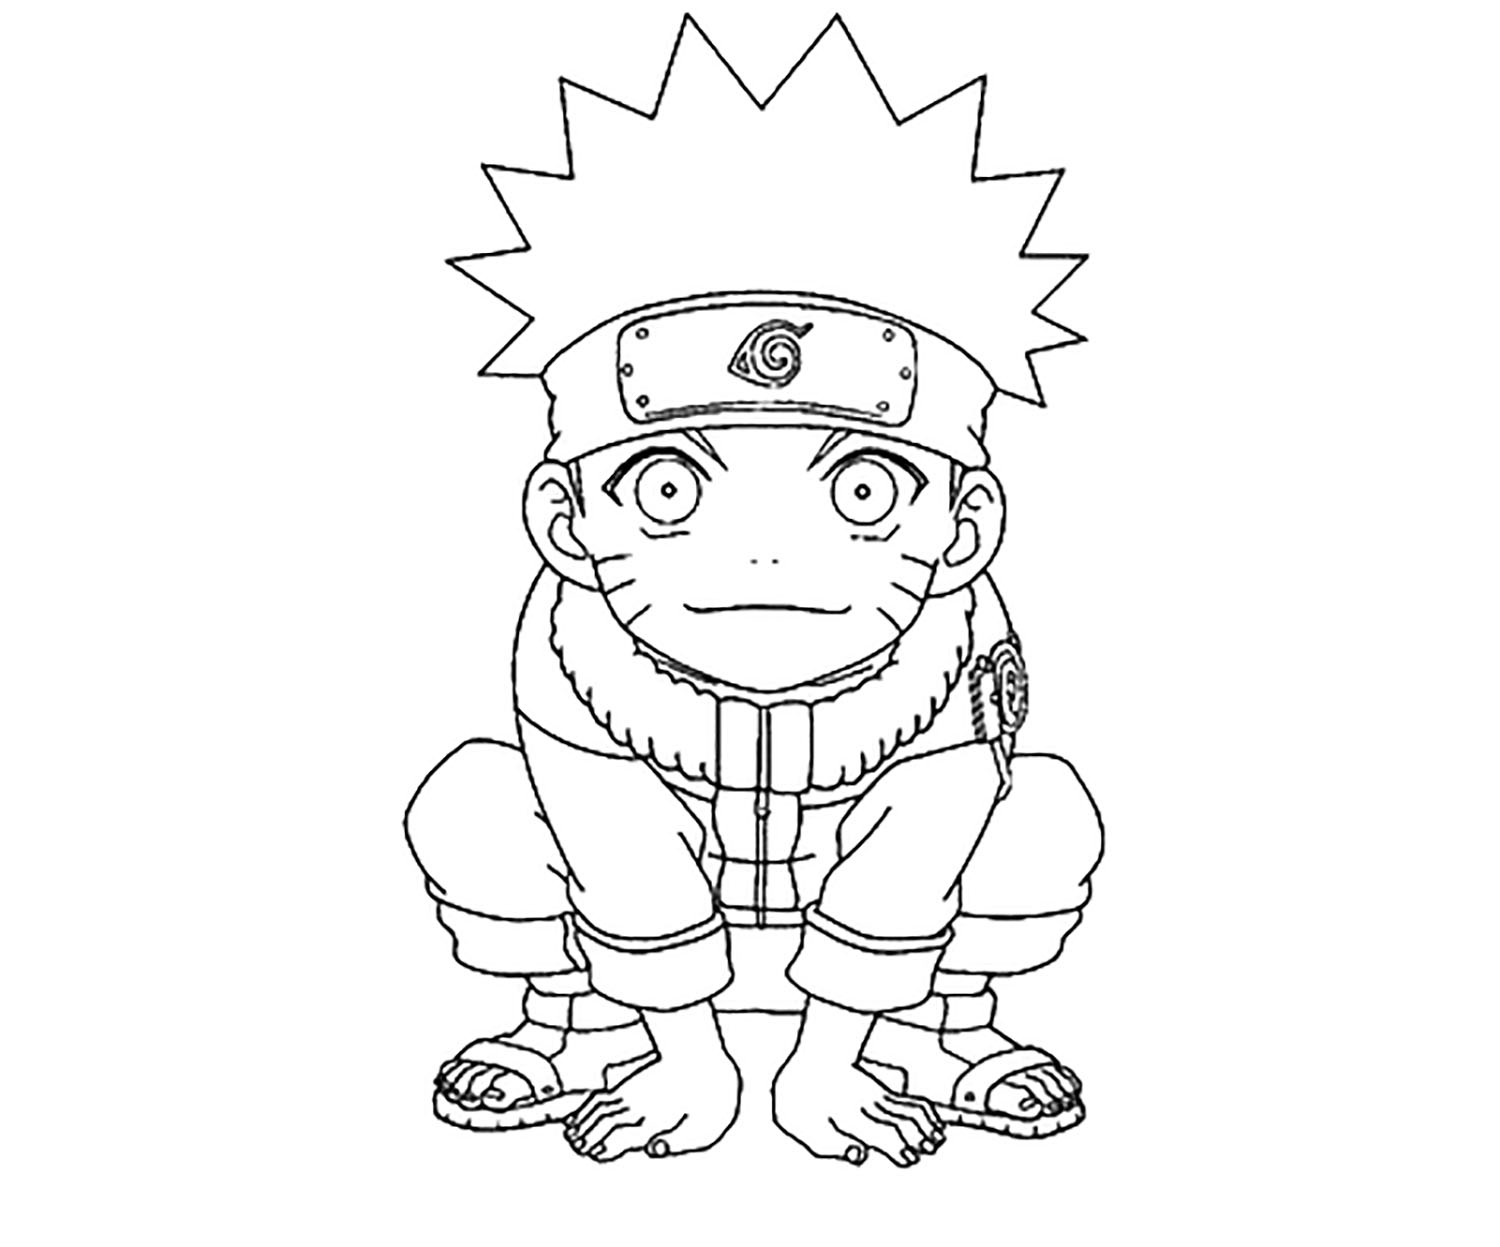 Download 95+ Naruto Cartoon For Kids Printable Free Coloring Pages PNG